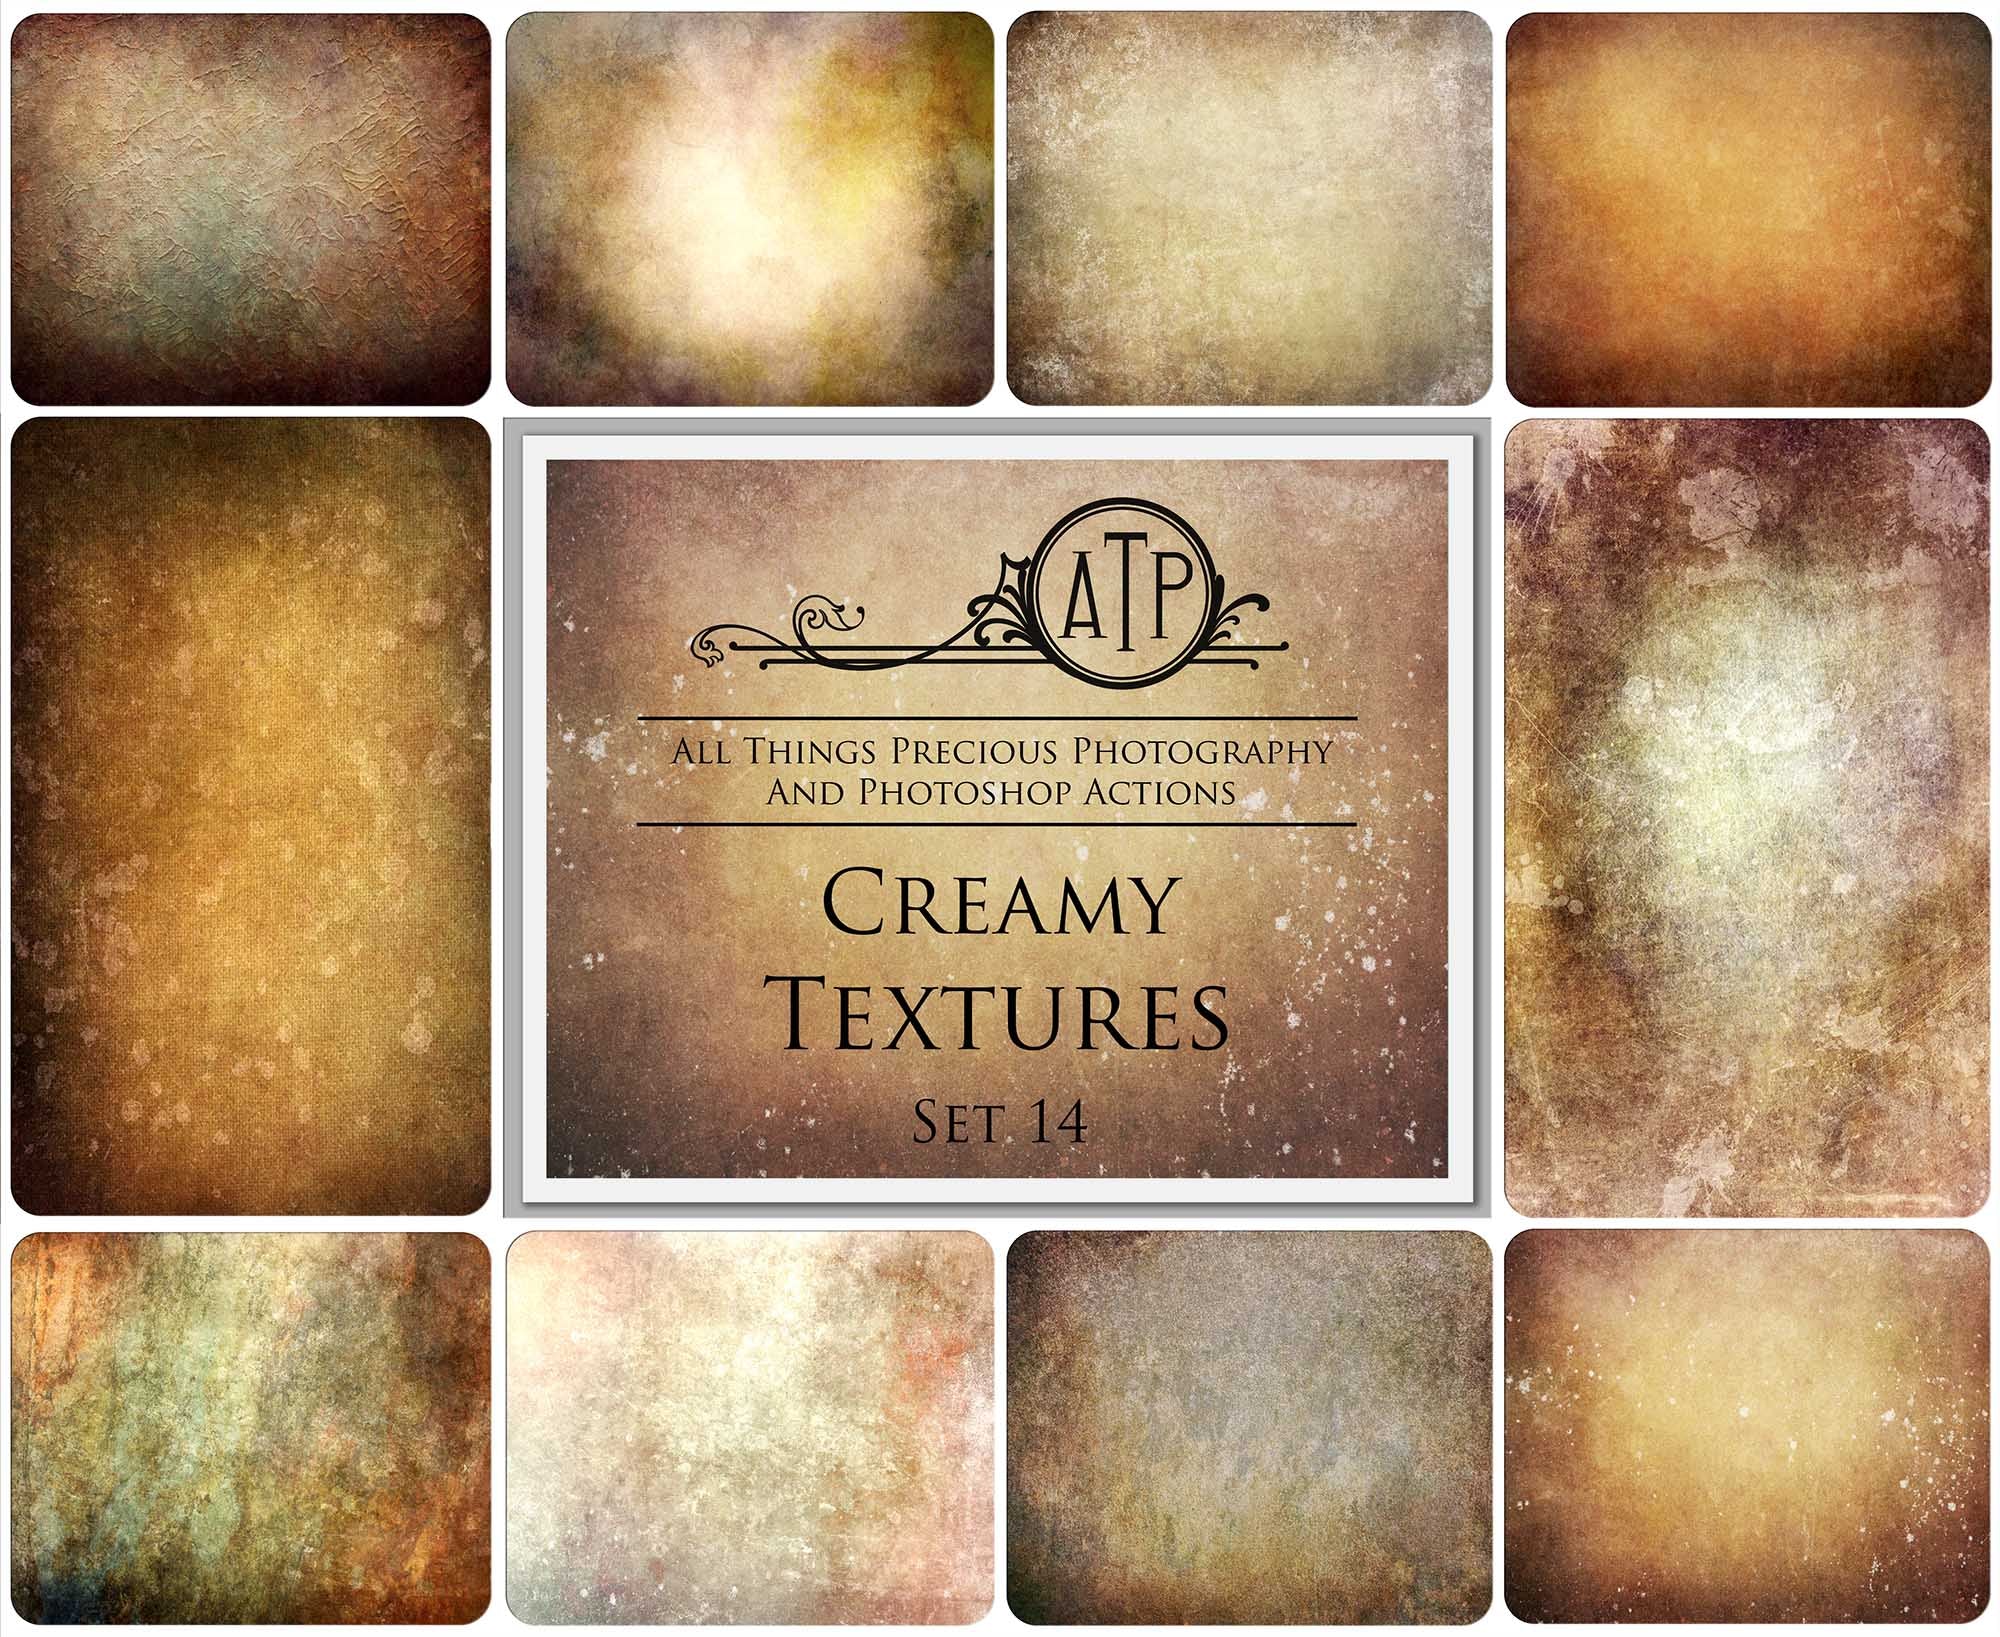 Vintage textures for fine art photography. Graphic assets for photographers.